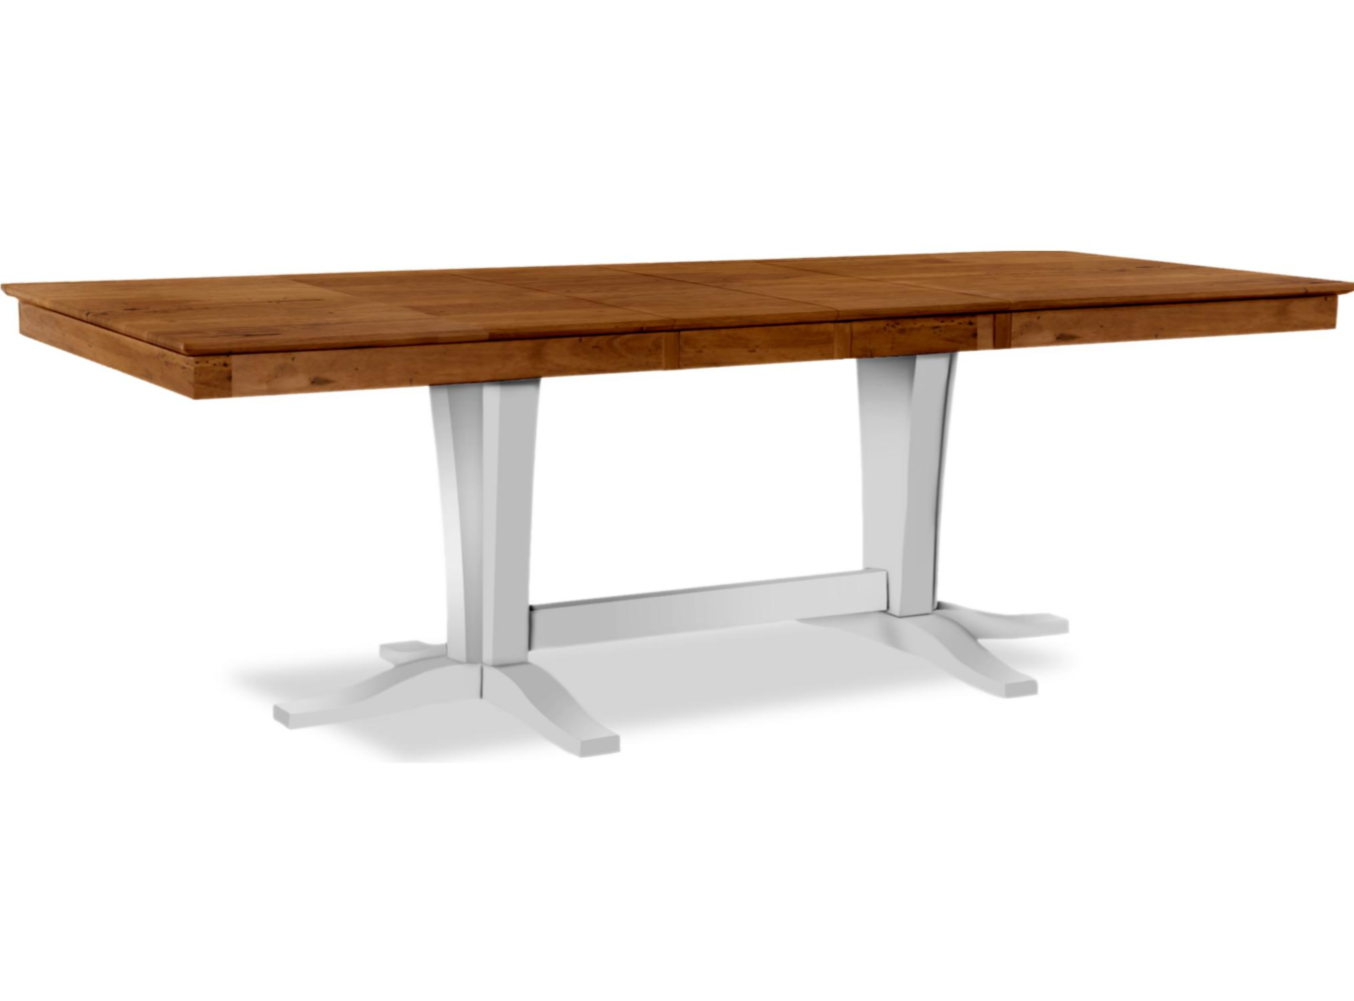 The Charleston Extension Table